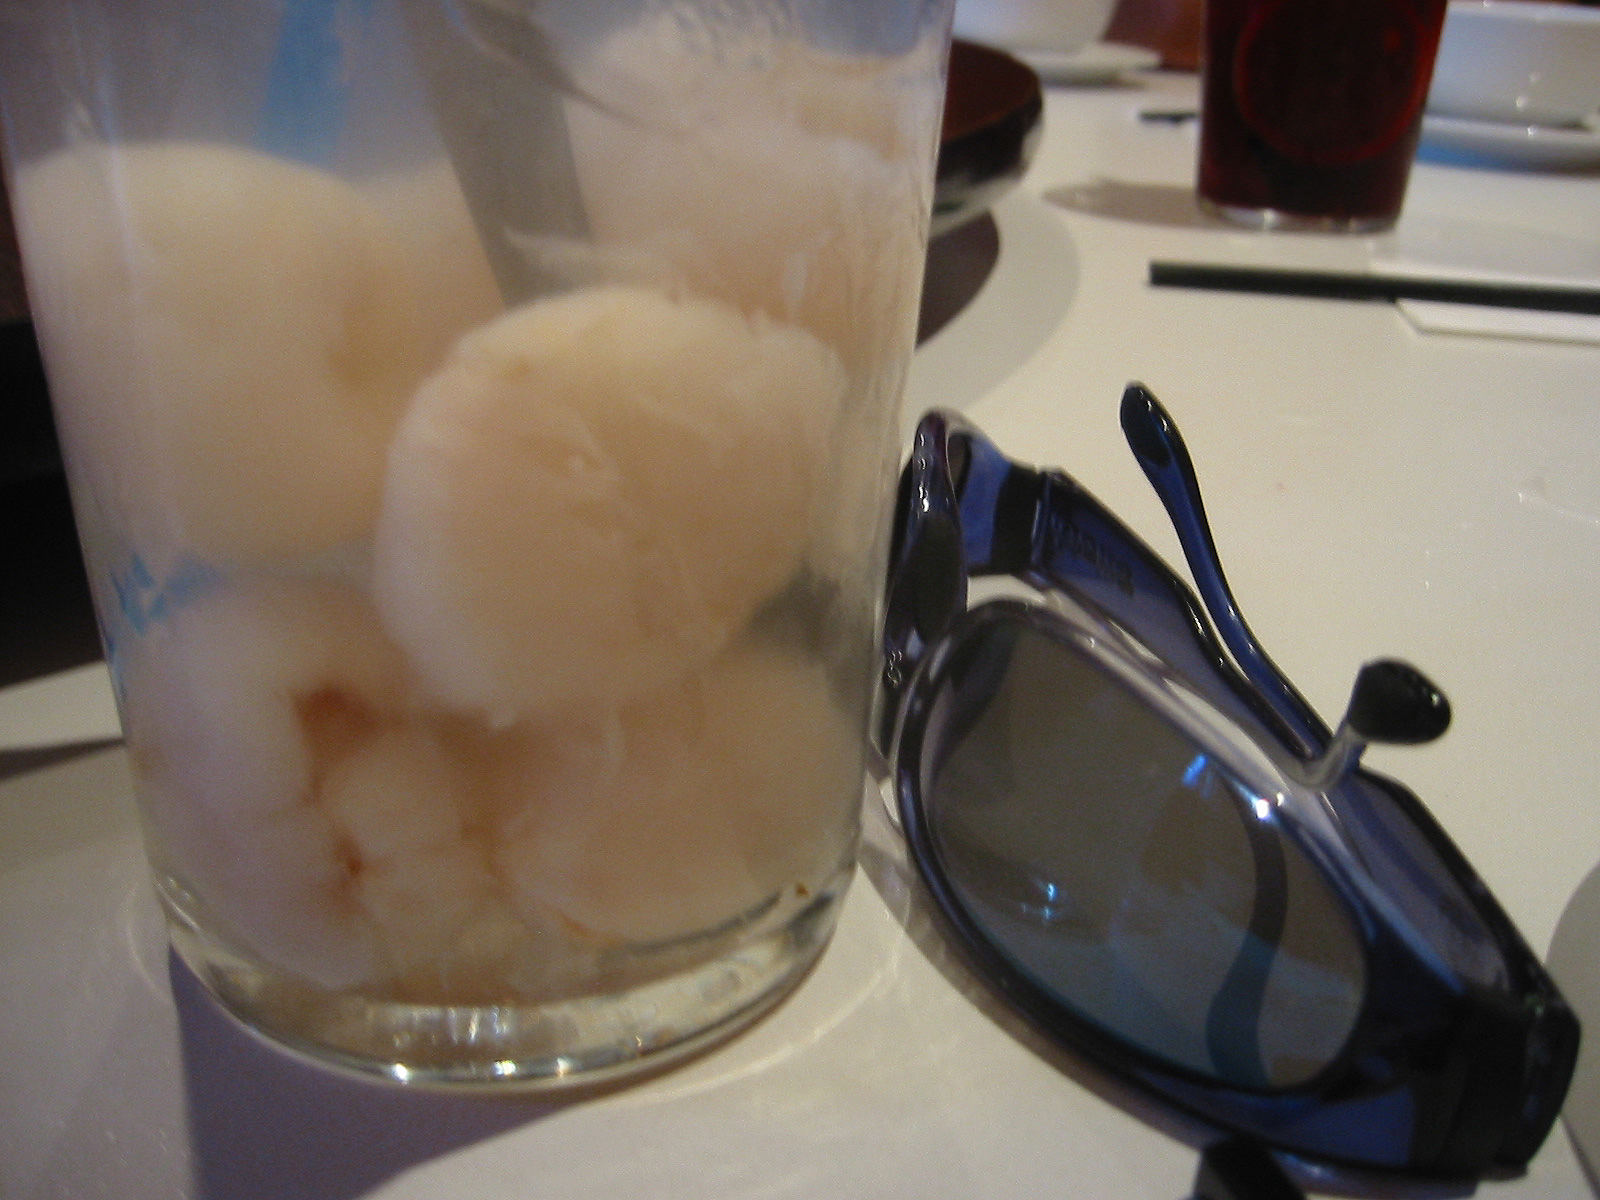 Lychee drink and sunnies